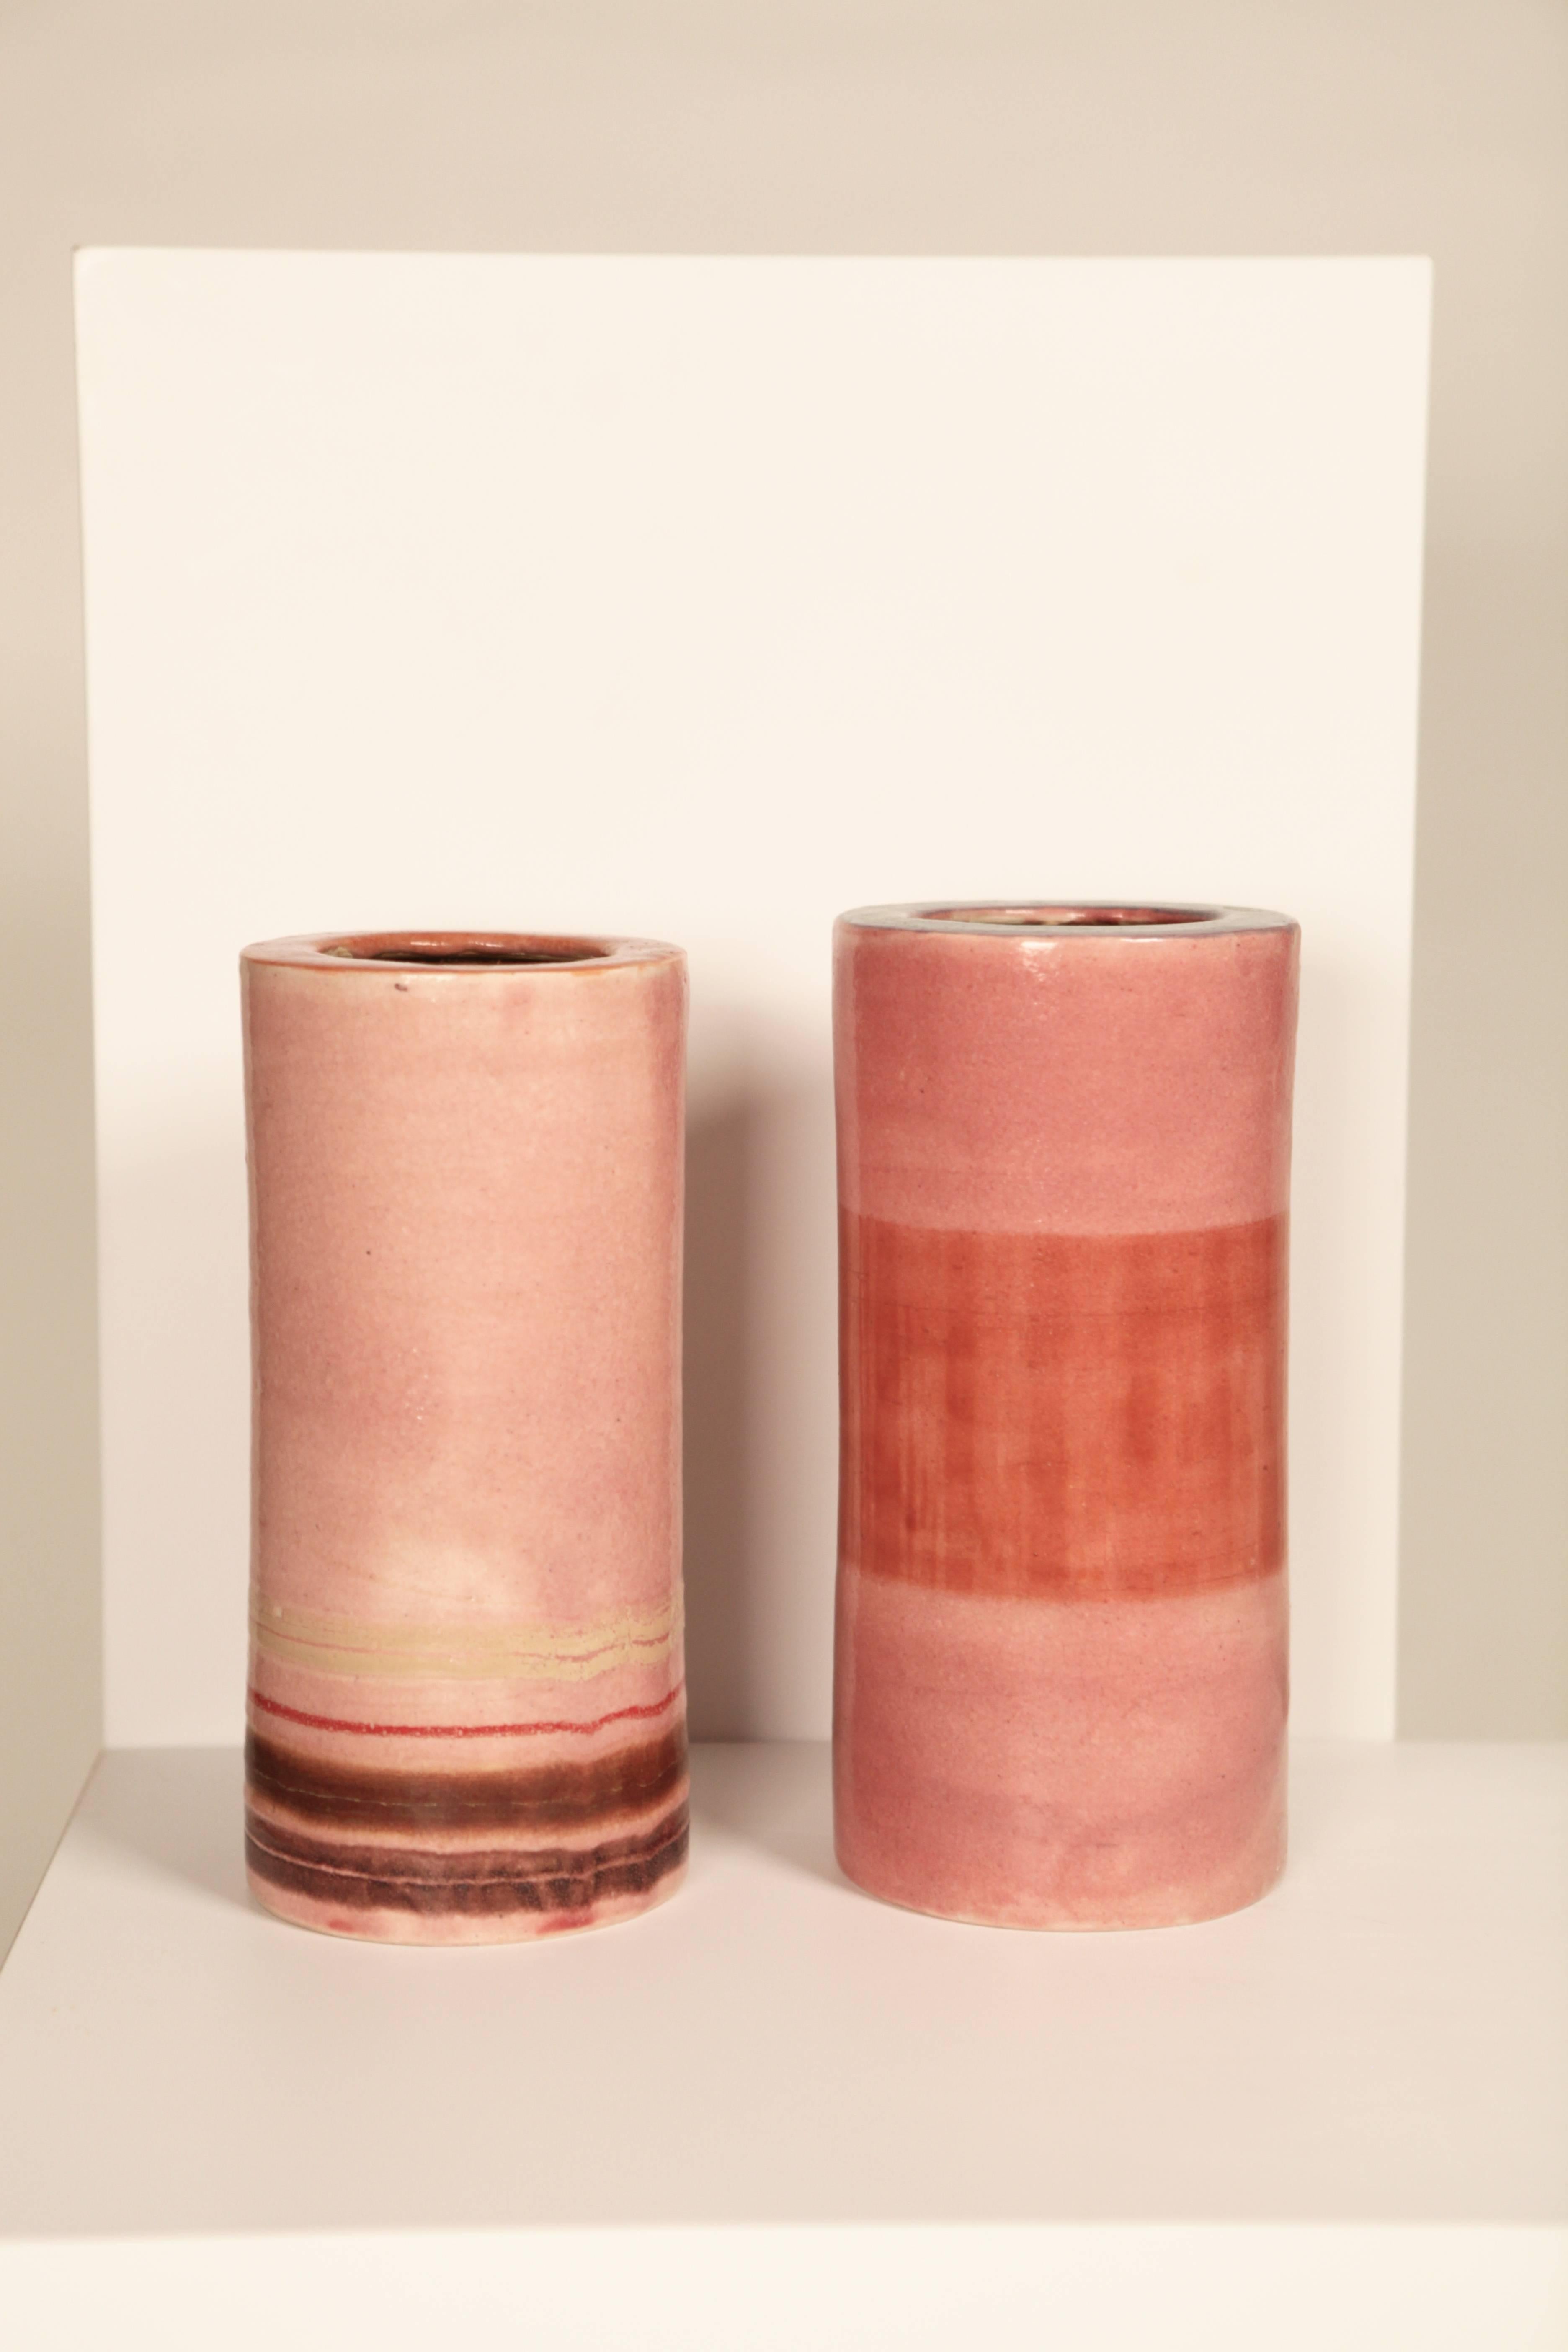 Bruno Gambone (*1936)
Two Vases, ceramic glazed
Limited Edition
created in 1969 and 1979
Italy 
signed Gambone, Italy to underside
left: H26cm x dia. 12cm
right:H35cm x dia. 13cm